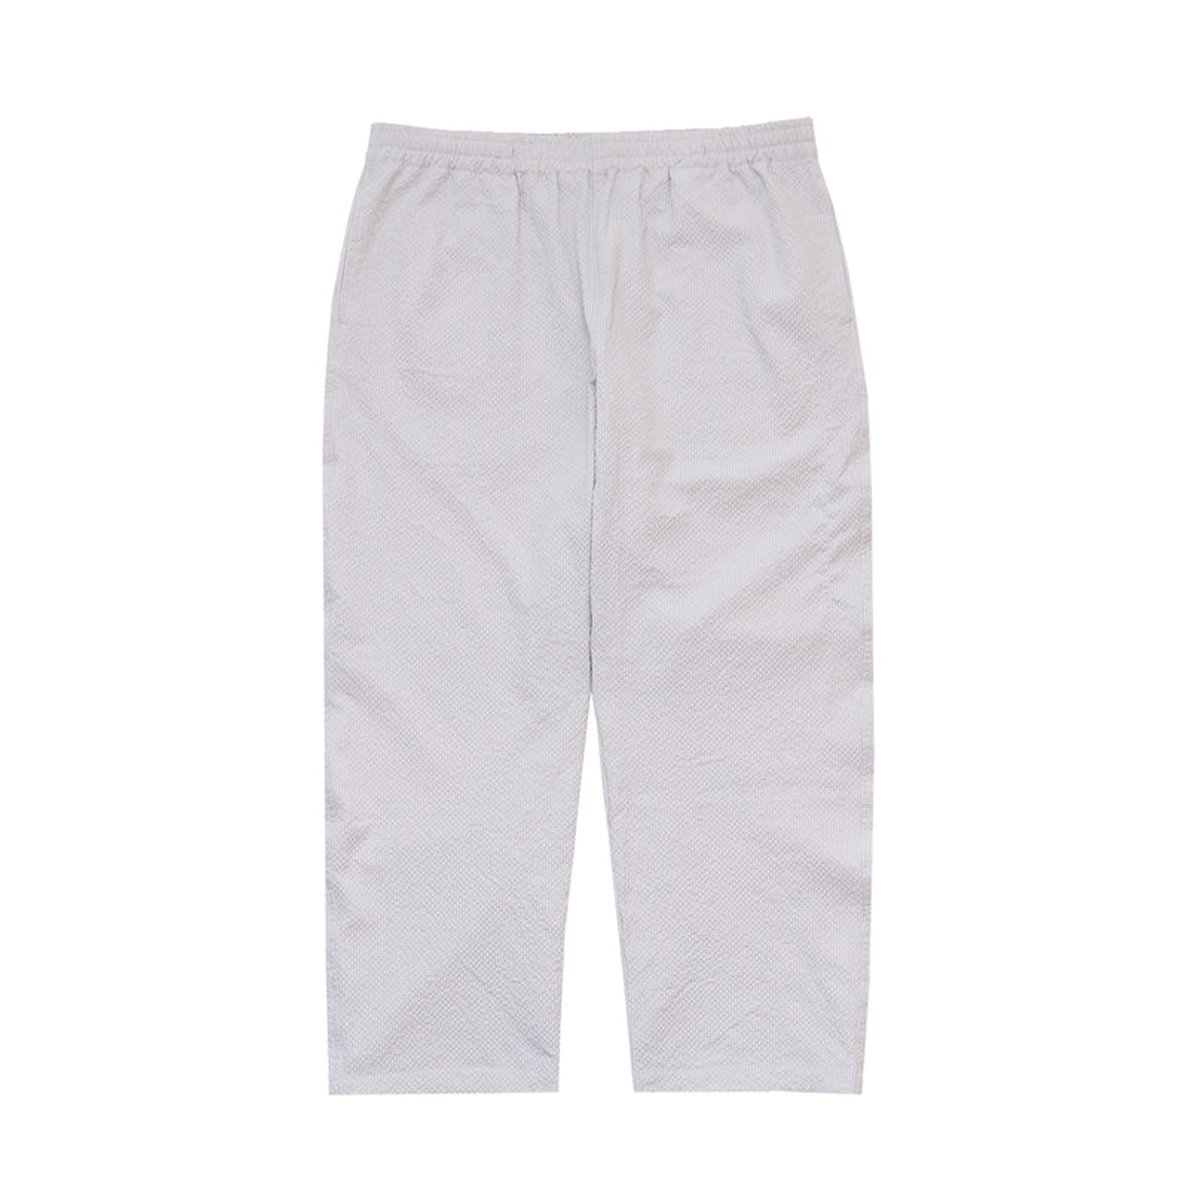 <img class='new_mark_img1' src='https://img.shop-pro.jp/img/new/icons8.gif' style='border:none;display:inline;margin:0px;padding:0px;width:auto;' />WhimsySeersucker Beach Pants (Grey)
                          </a>
            <span class=